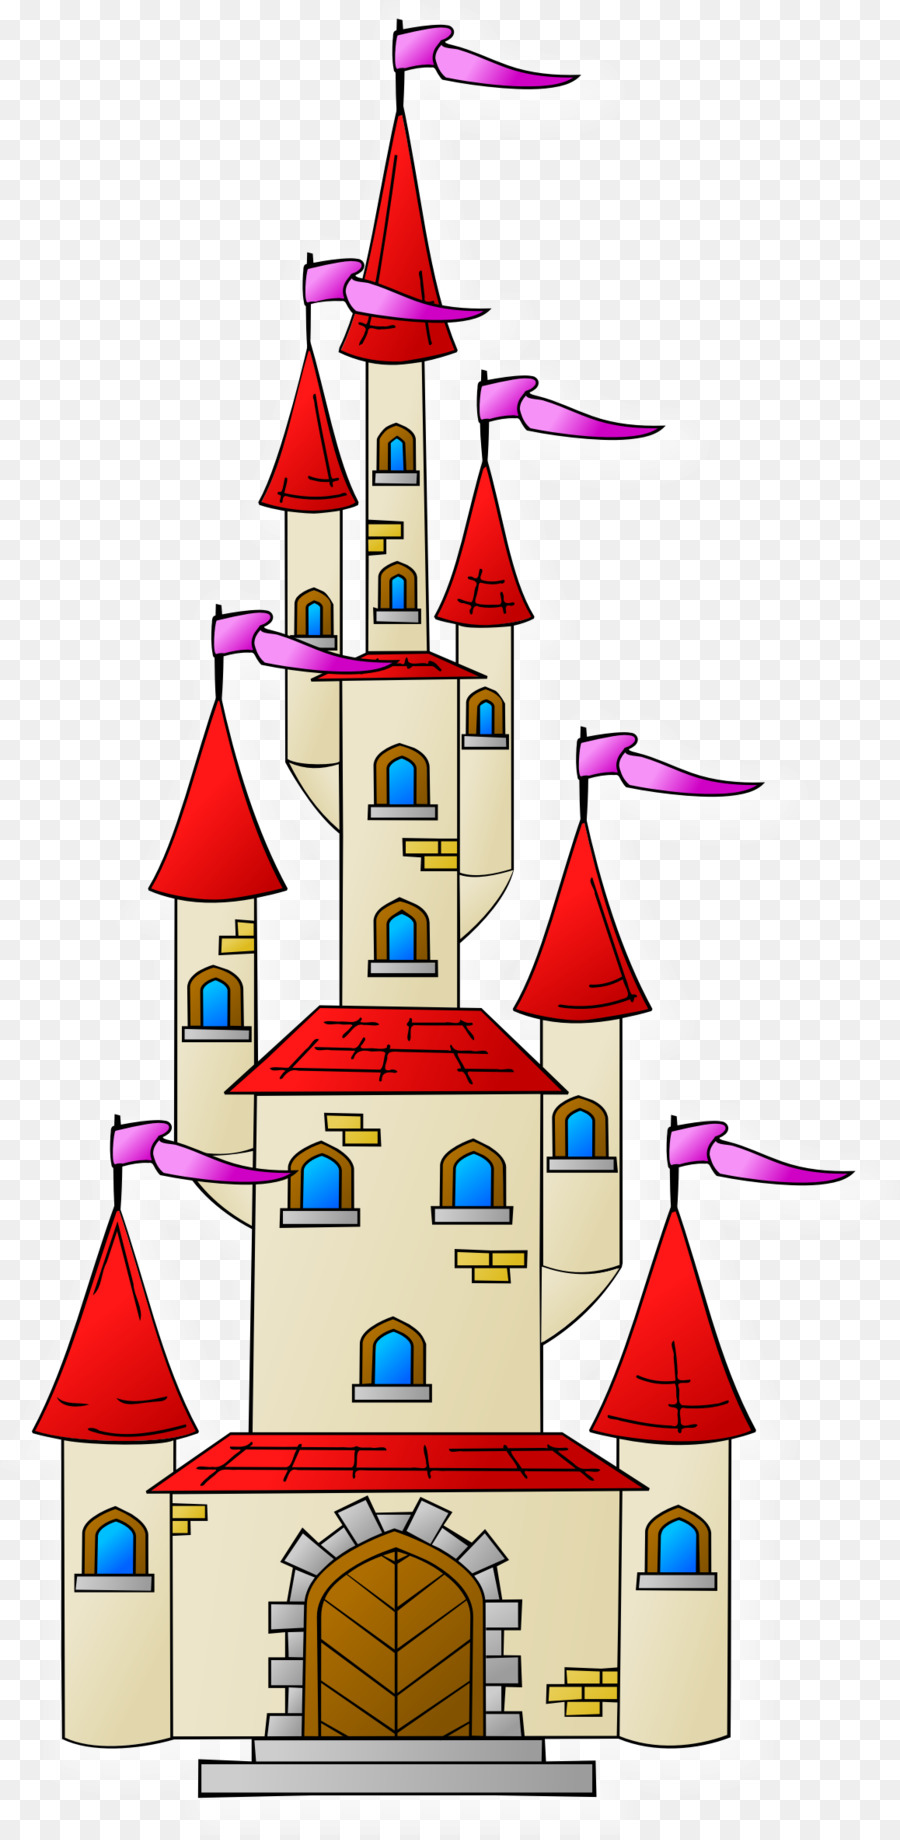 palace clipart castle tower